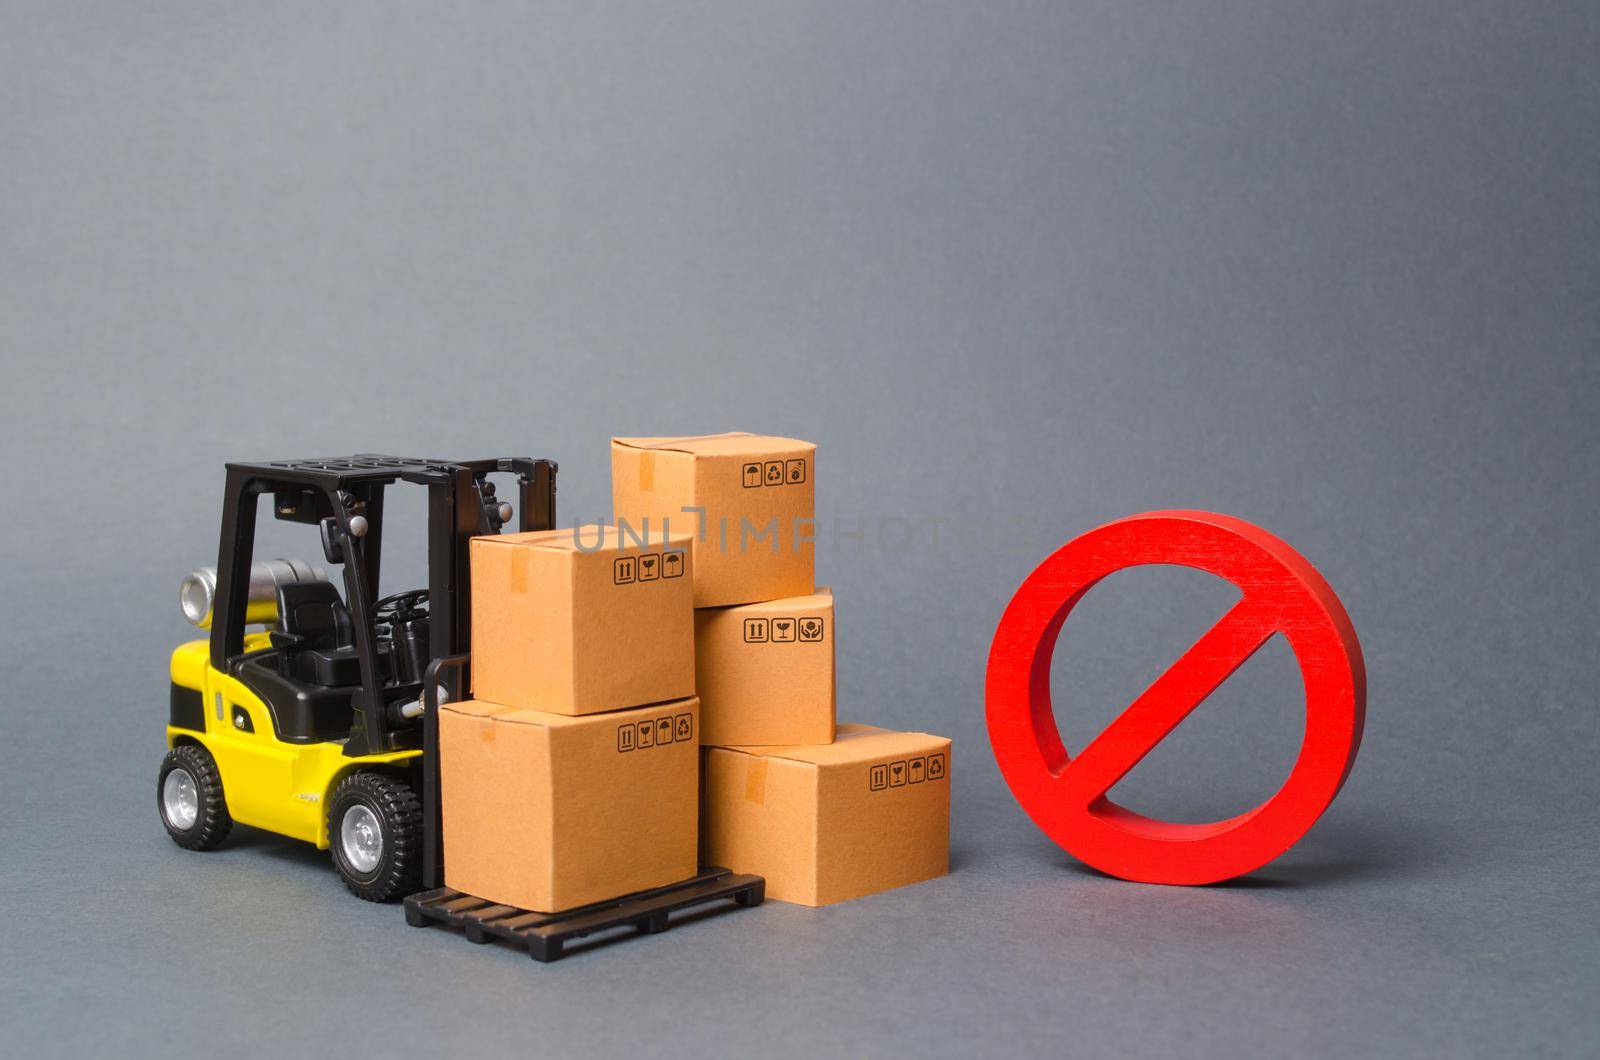 Forklift truck near cardboard boxes and a red symbol NO. Embargo, trade wars. Restriction on the importation of goods, proprietary for business. Inability to sell products, ban import. No delivery.